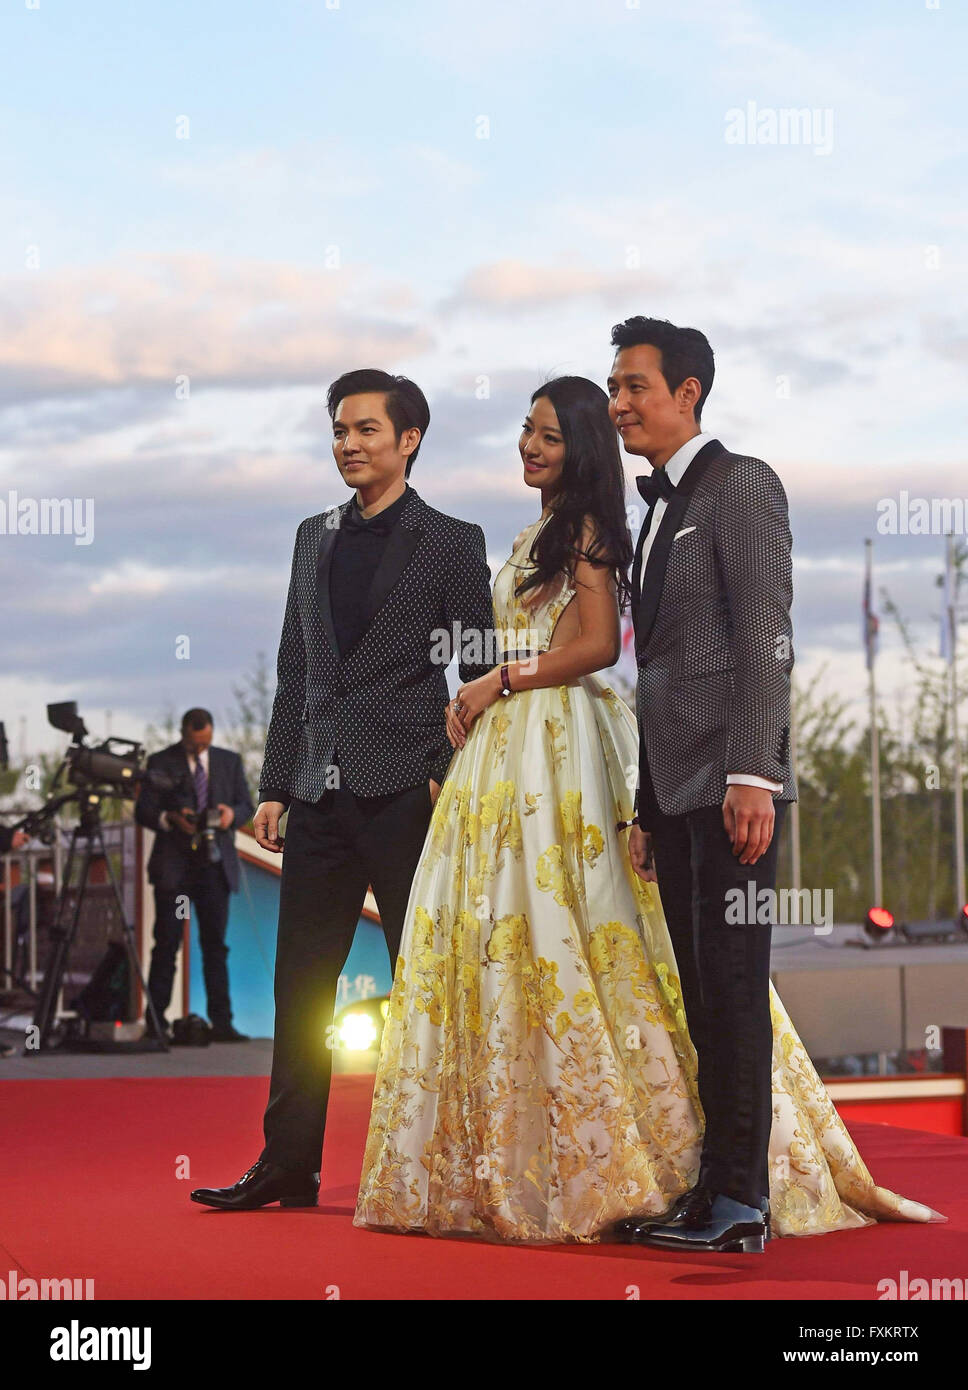 Beijing, China. 16th Apr, 2016. Actor Wallace Chung, actress Lang Yueting and actor Lee Jung Jae (from L to R) attend a red carpet event during the opening ceremony of the 6th Beijing International Film Festival (BJIFF) in Beijing, capital of China, April 16, 2016. The BJIFF kicked off Saturday and will last until April 23. Credit:  Jin Liangkuai/Xinhua/Alamy Live News Stock Photo